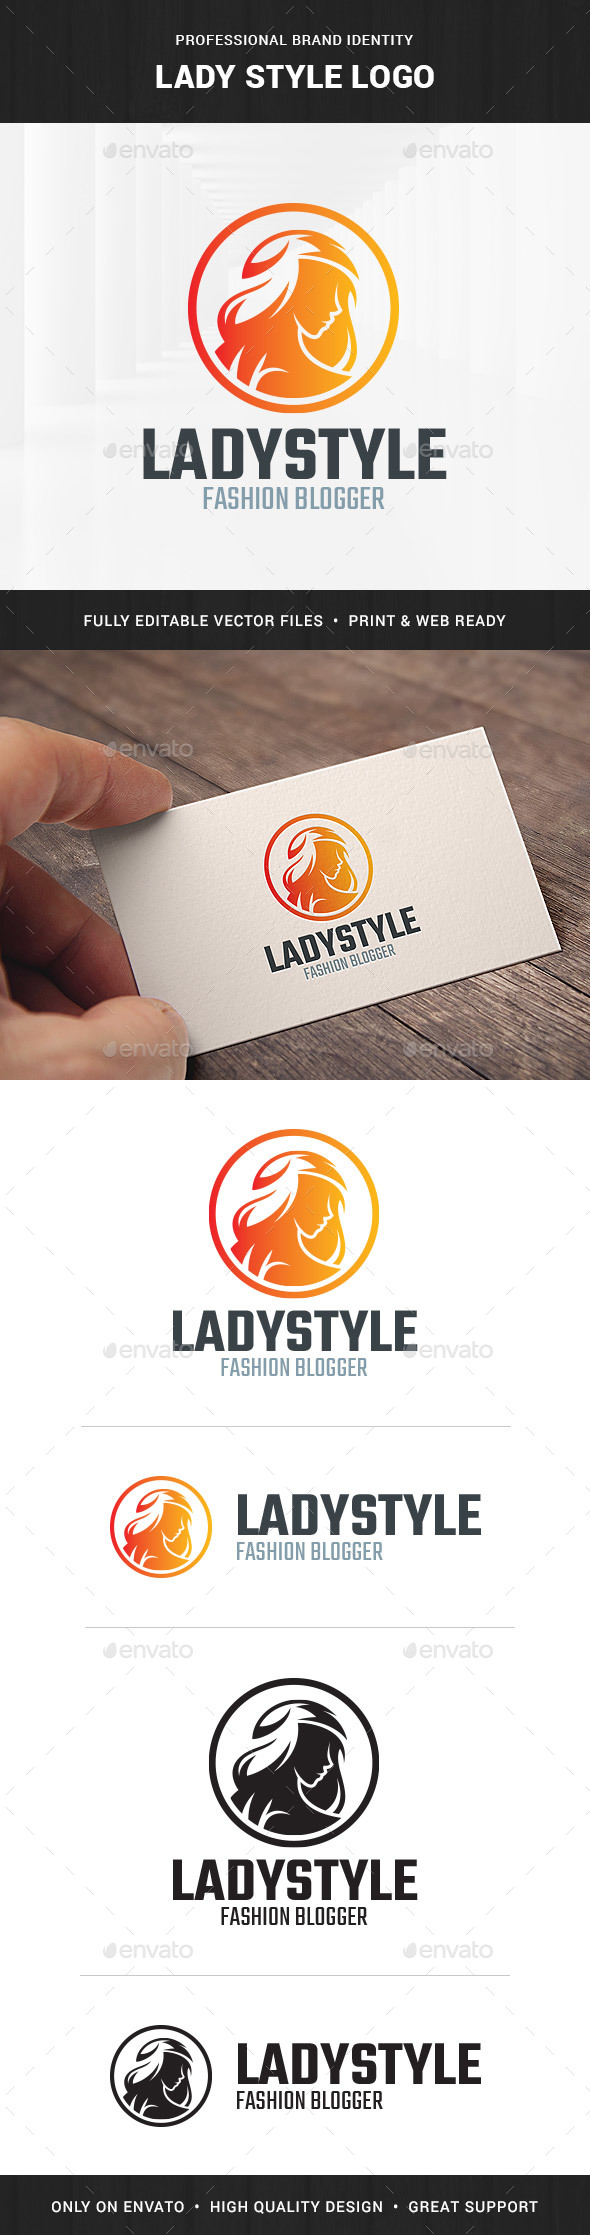 Lady Style Logo Template